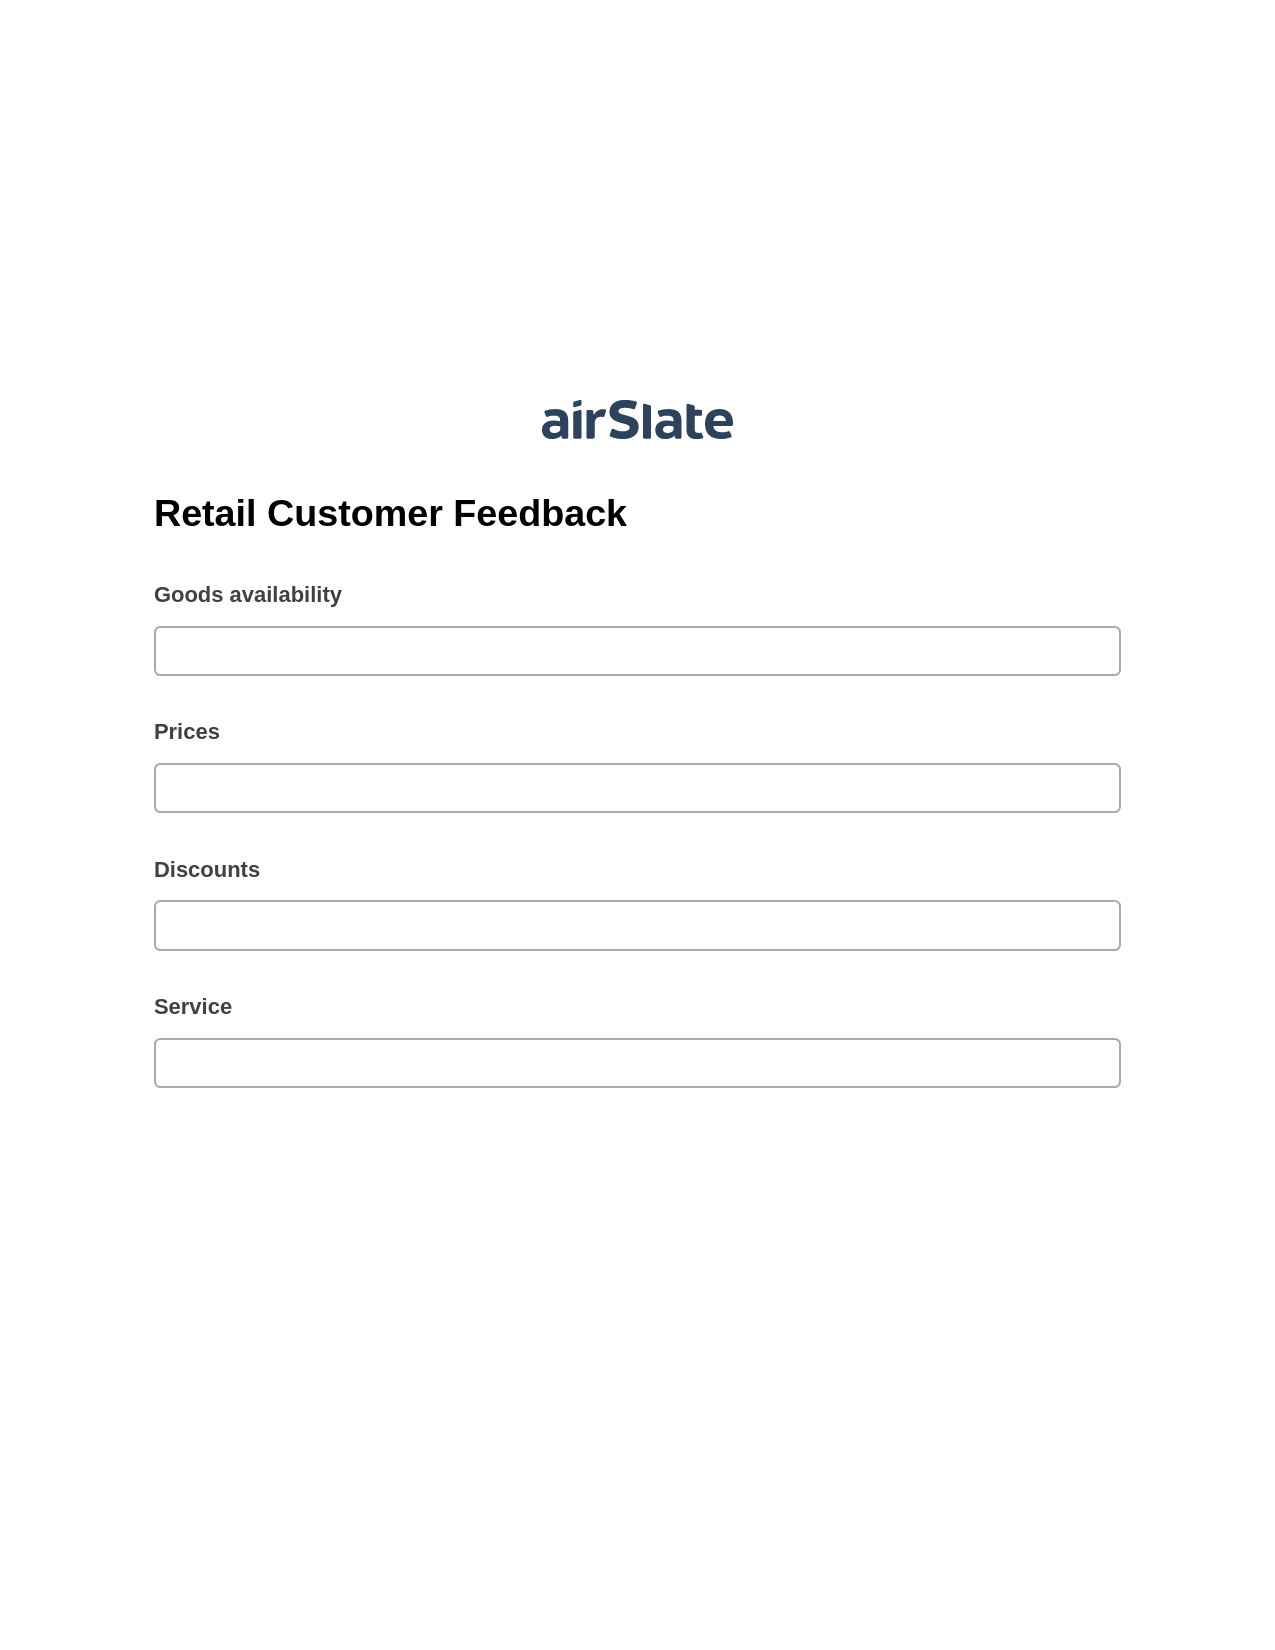 Retail Customer Feedback Pre-fill from Excel Spreadsheet Bot, Create NetSuite Records Bot, Export to MySQL Bot